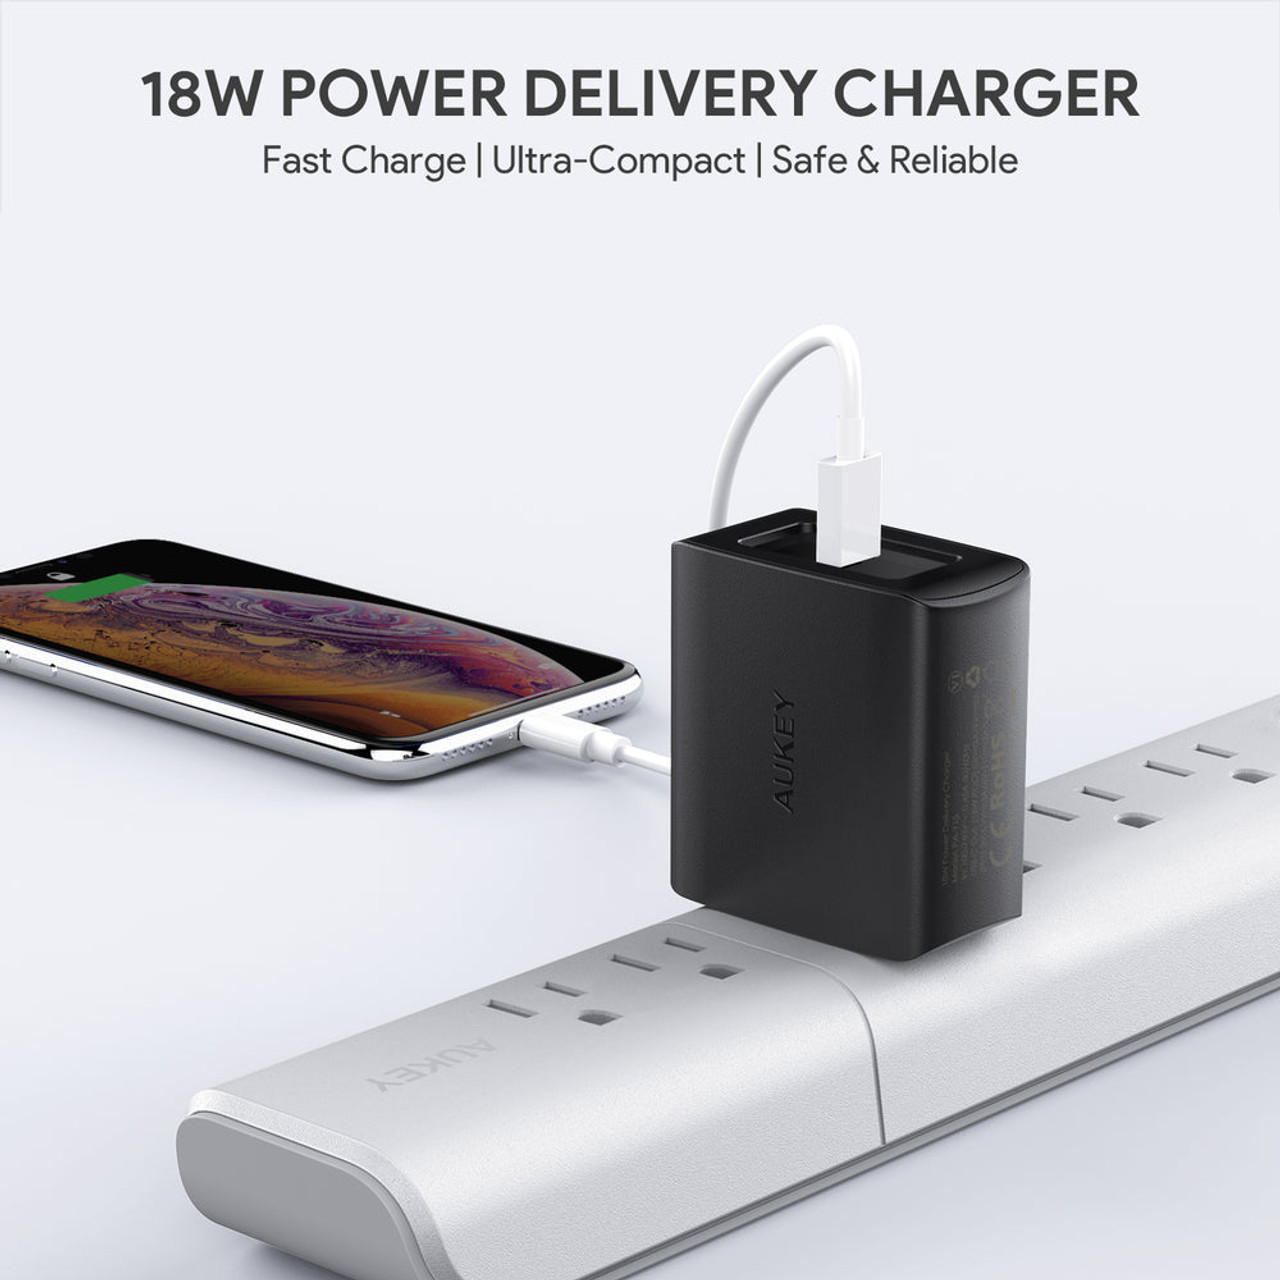 AUKEY PA-Y15 USB-C Wall Charger | 18W Power Delivery product image